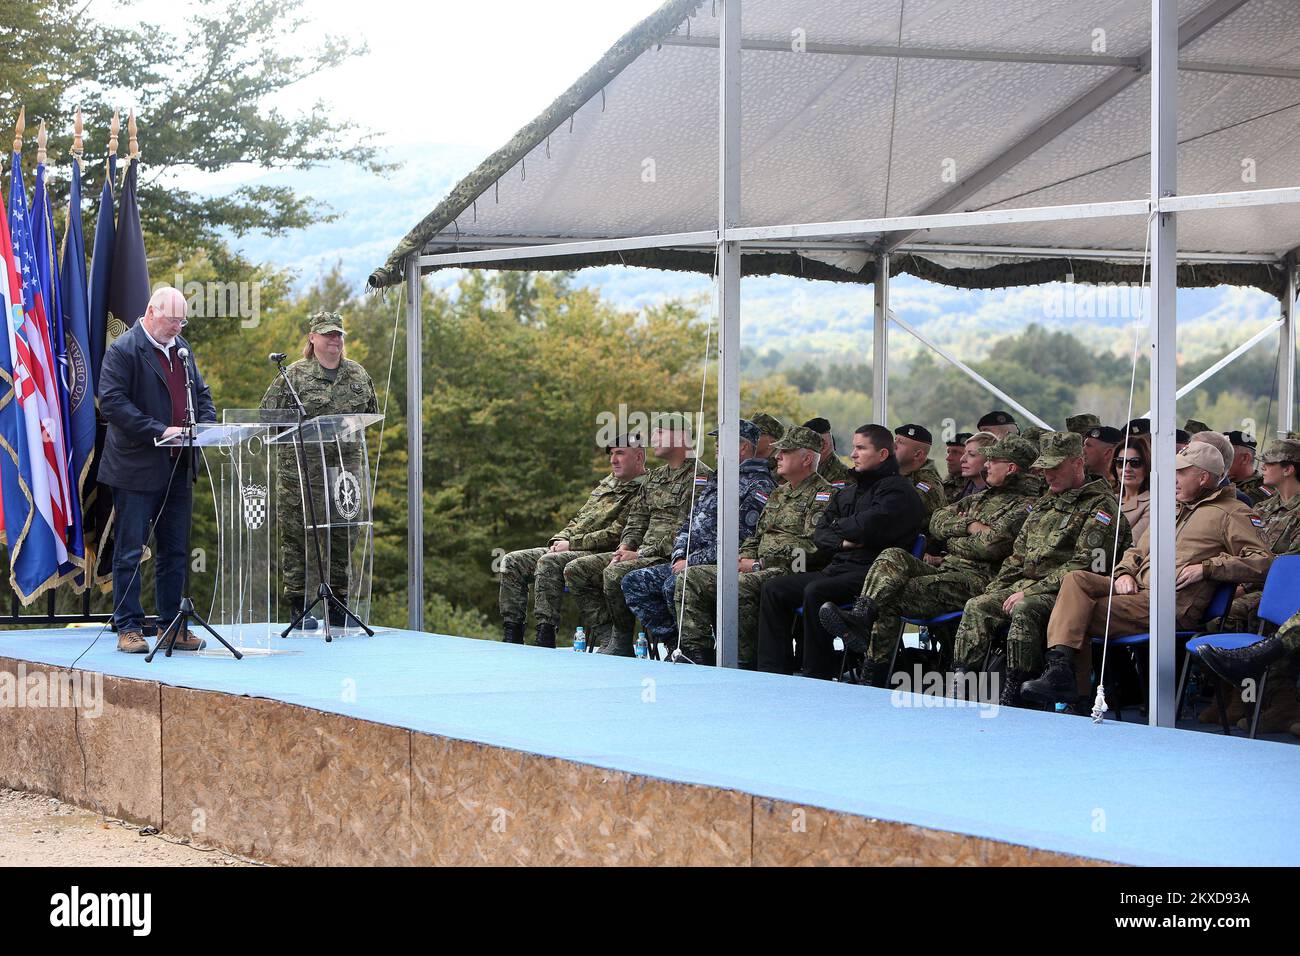 04.10.2019., Croatia, Slunj - At the military training ground 'Eugen Kvaternik' in Slunj, a presentation of the functioning of the control and surveillance tower, donation of the United States Government to the Croatian Army, was held. It is a Range Control Tower, built by the US Air Force Command in Europe, which will ensure the safe and successful conduct and supervision of training and exercises in combat firing at the military firing range of Eugen Kvaternik. â€œIn Slunj. As part of the presentation of the RC tower, a methodical demonstration of JTAC capabilities was held with the particip Stock Photo